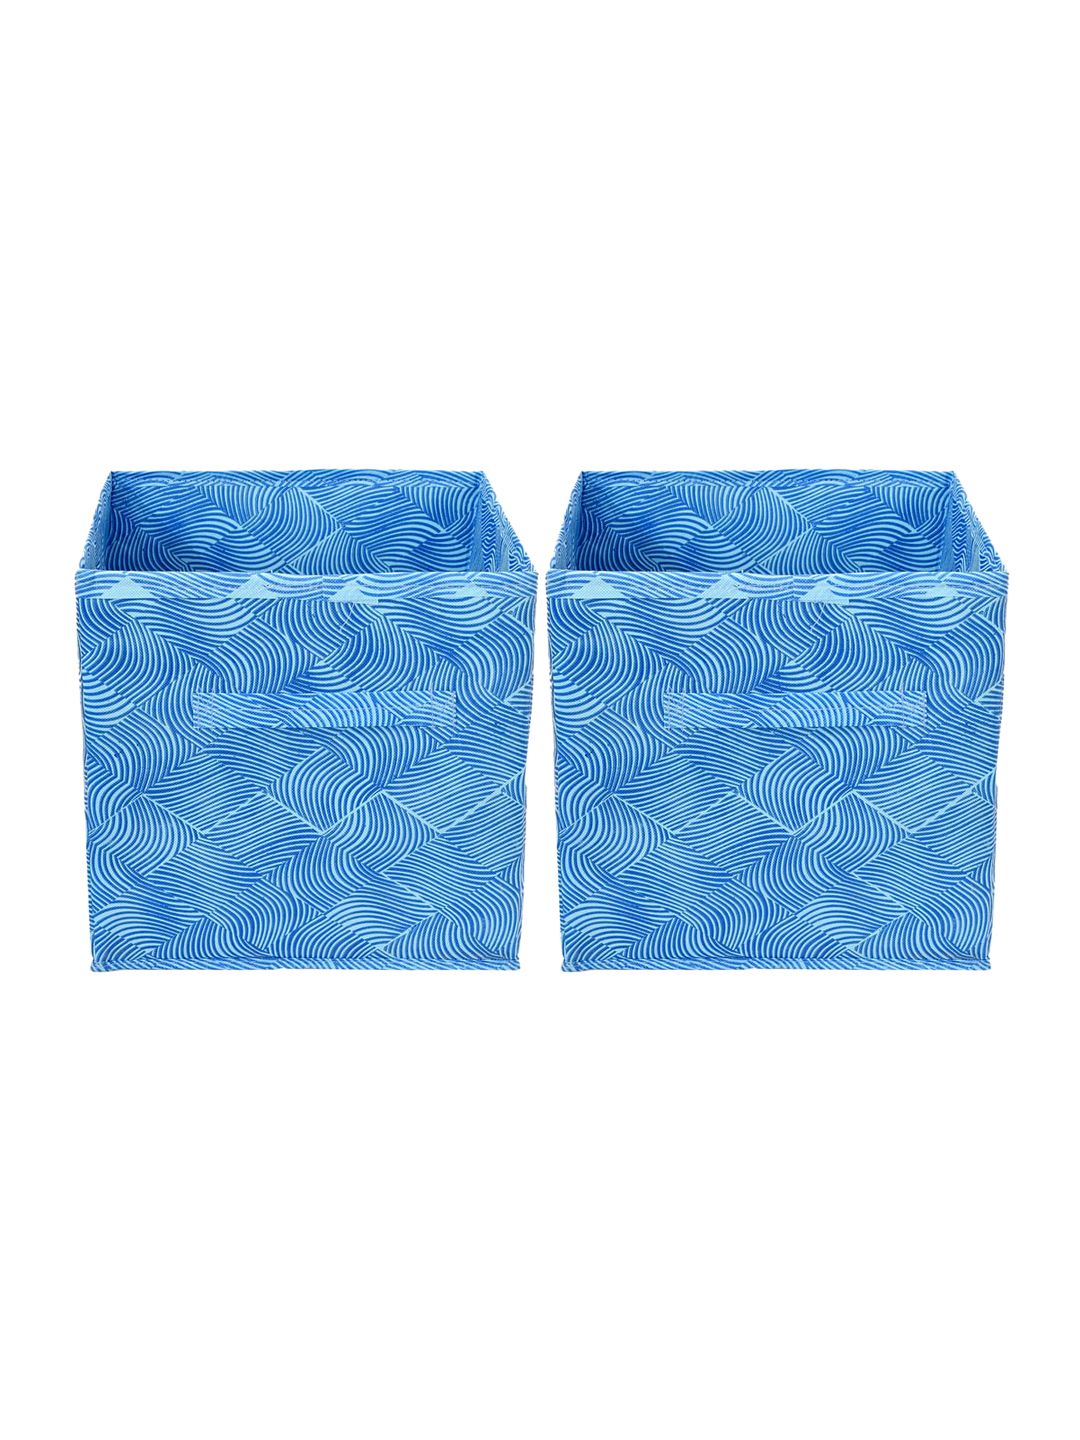 Kuber Industries Set Of 2 Blue Printed Storage Cube Boxes With Handles Price in India